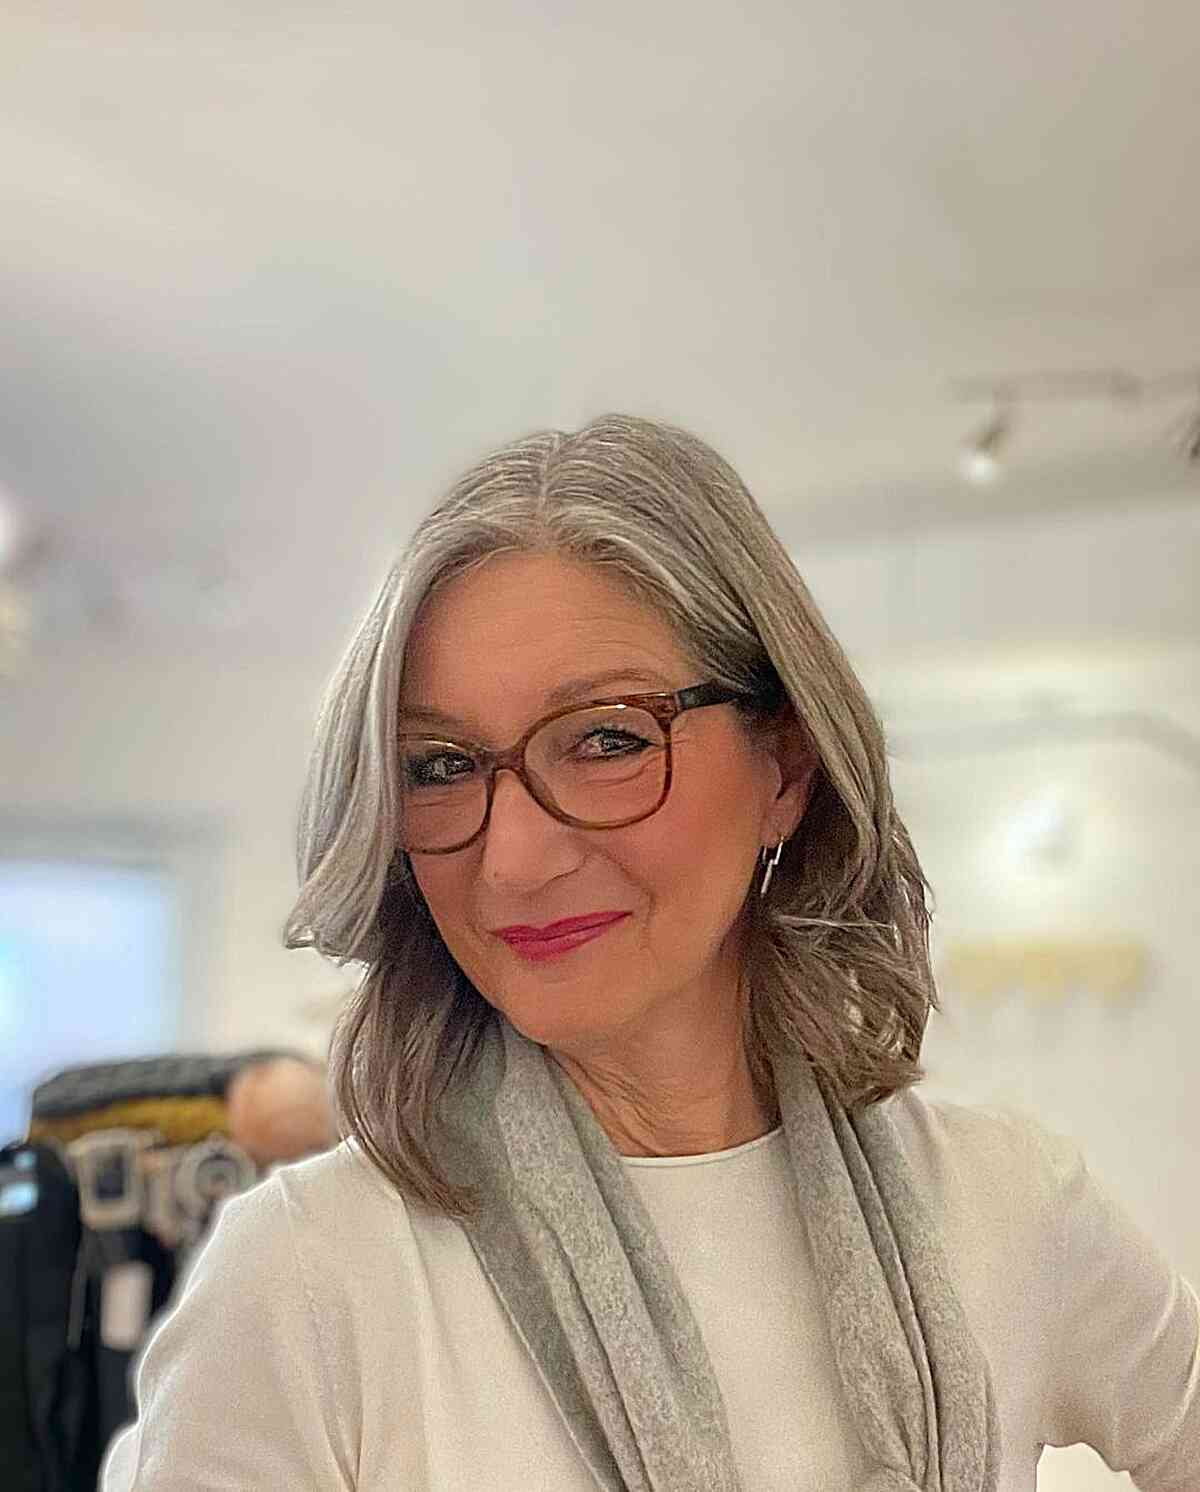 Gorgeous Off Center Part on a Shoulder-Length Bob for Women Over 60 with Glasses